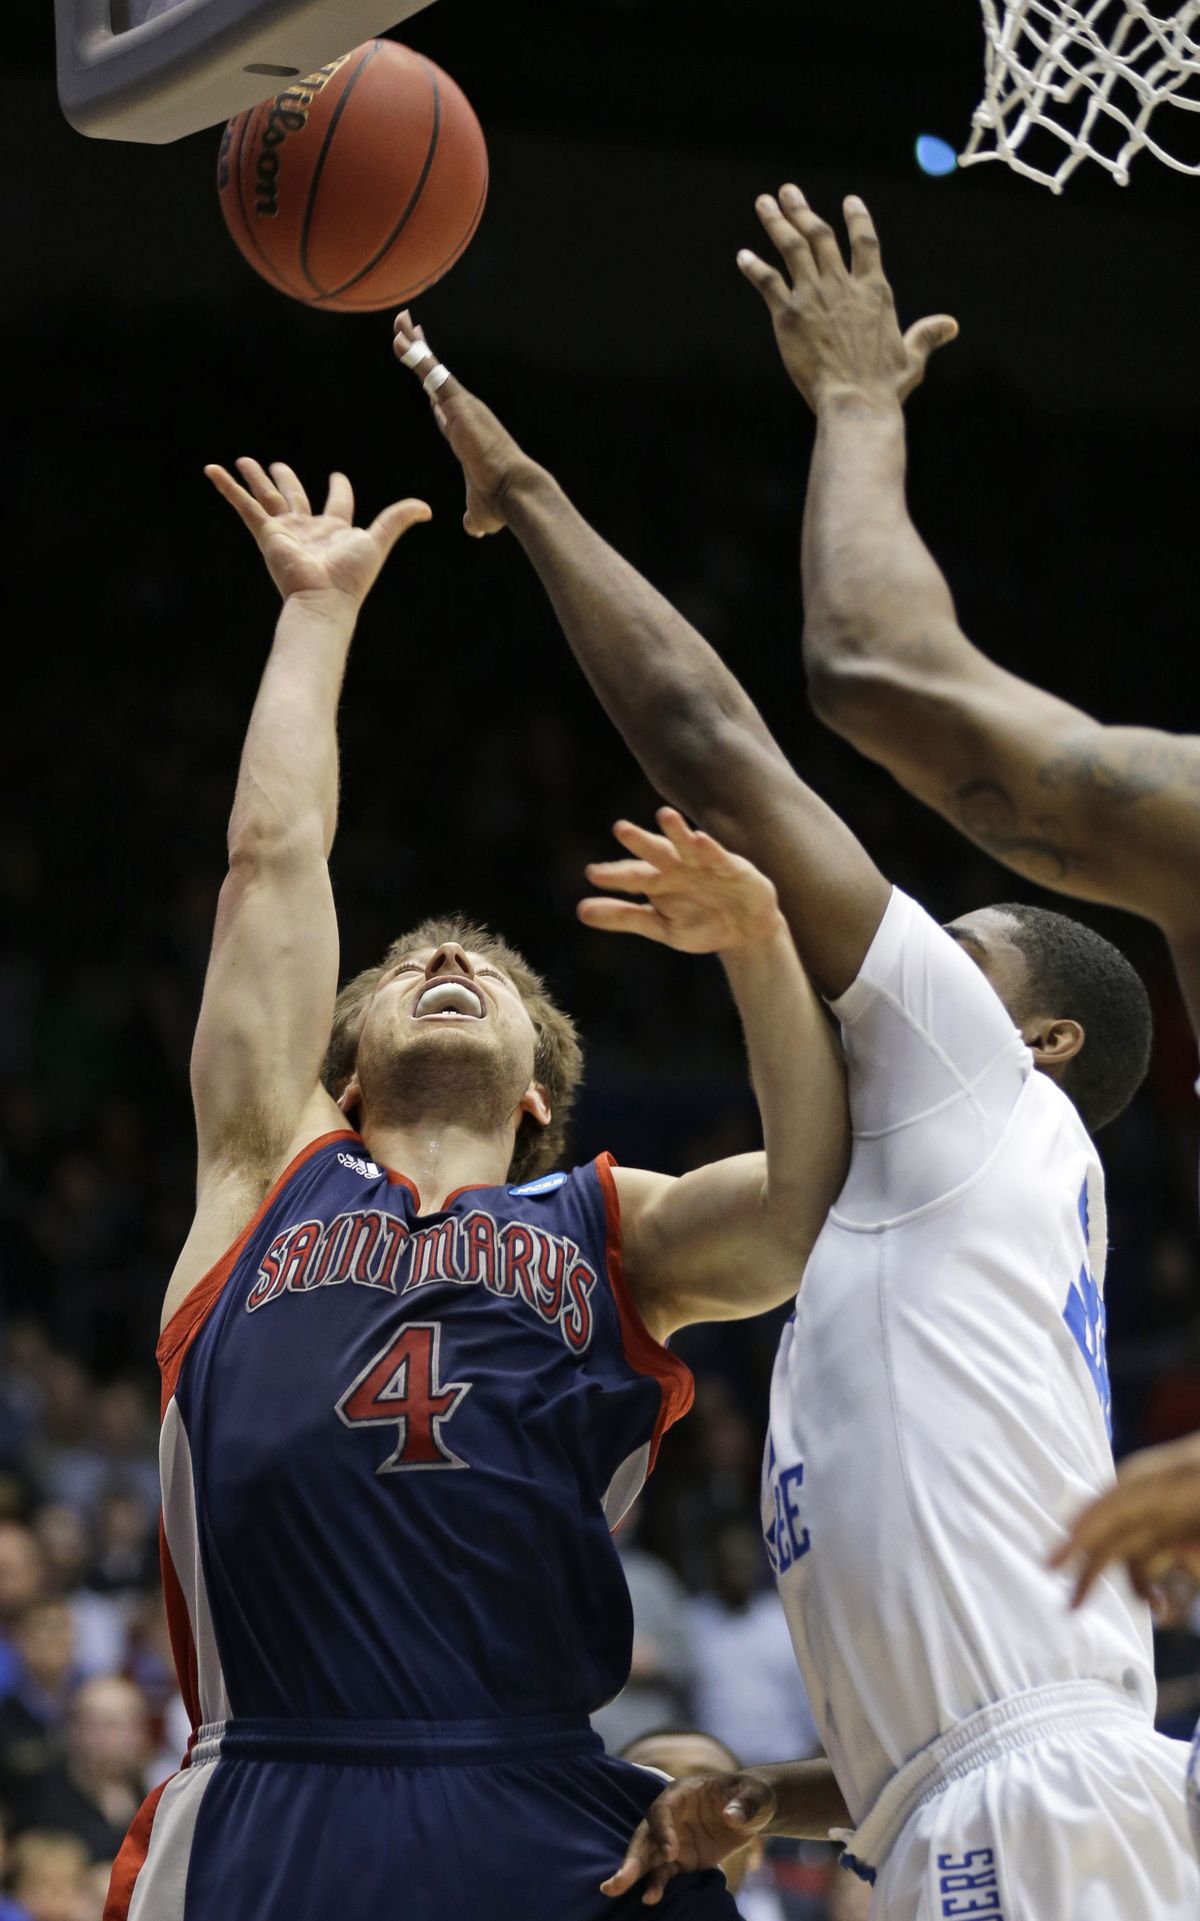 It didn’t happen often: Matthew Dellavedova getting a shot blocked, here by Middle Tennessee’s JT Sulton. (Associated Press)